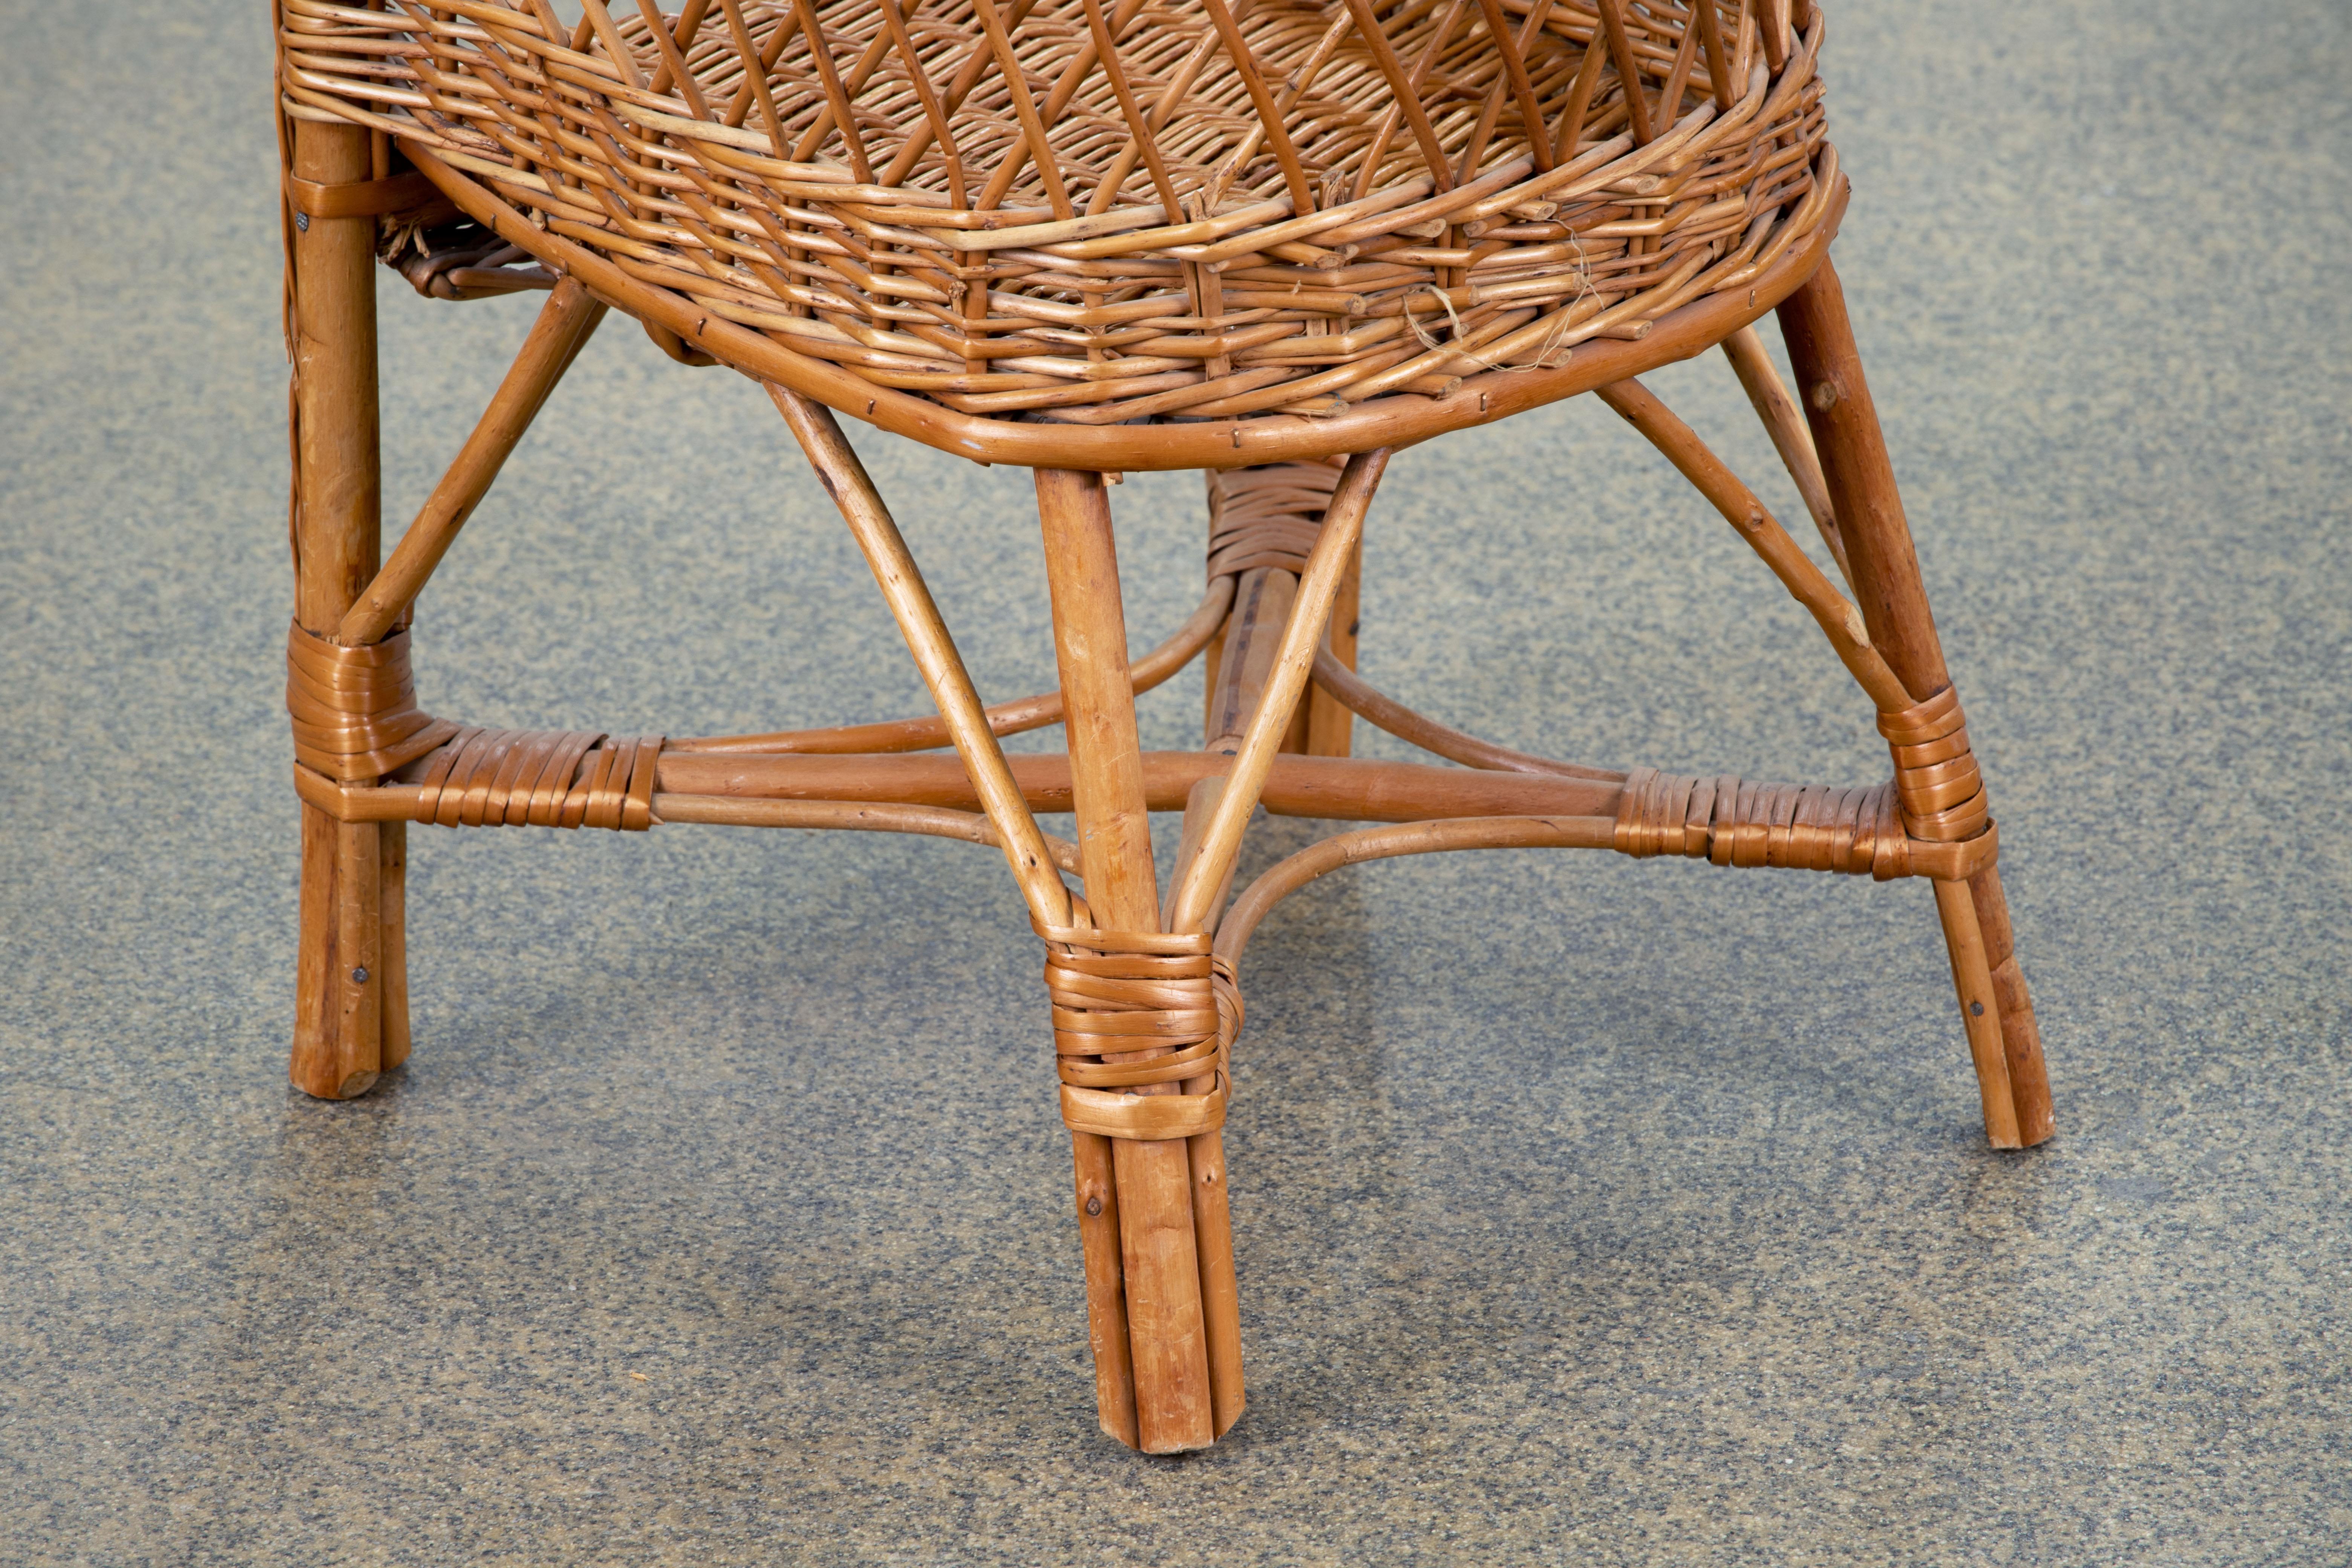 Midcentury Organic Kid Rattan Chair, 1970s, France For Sale 2